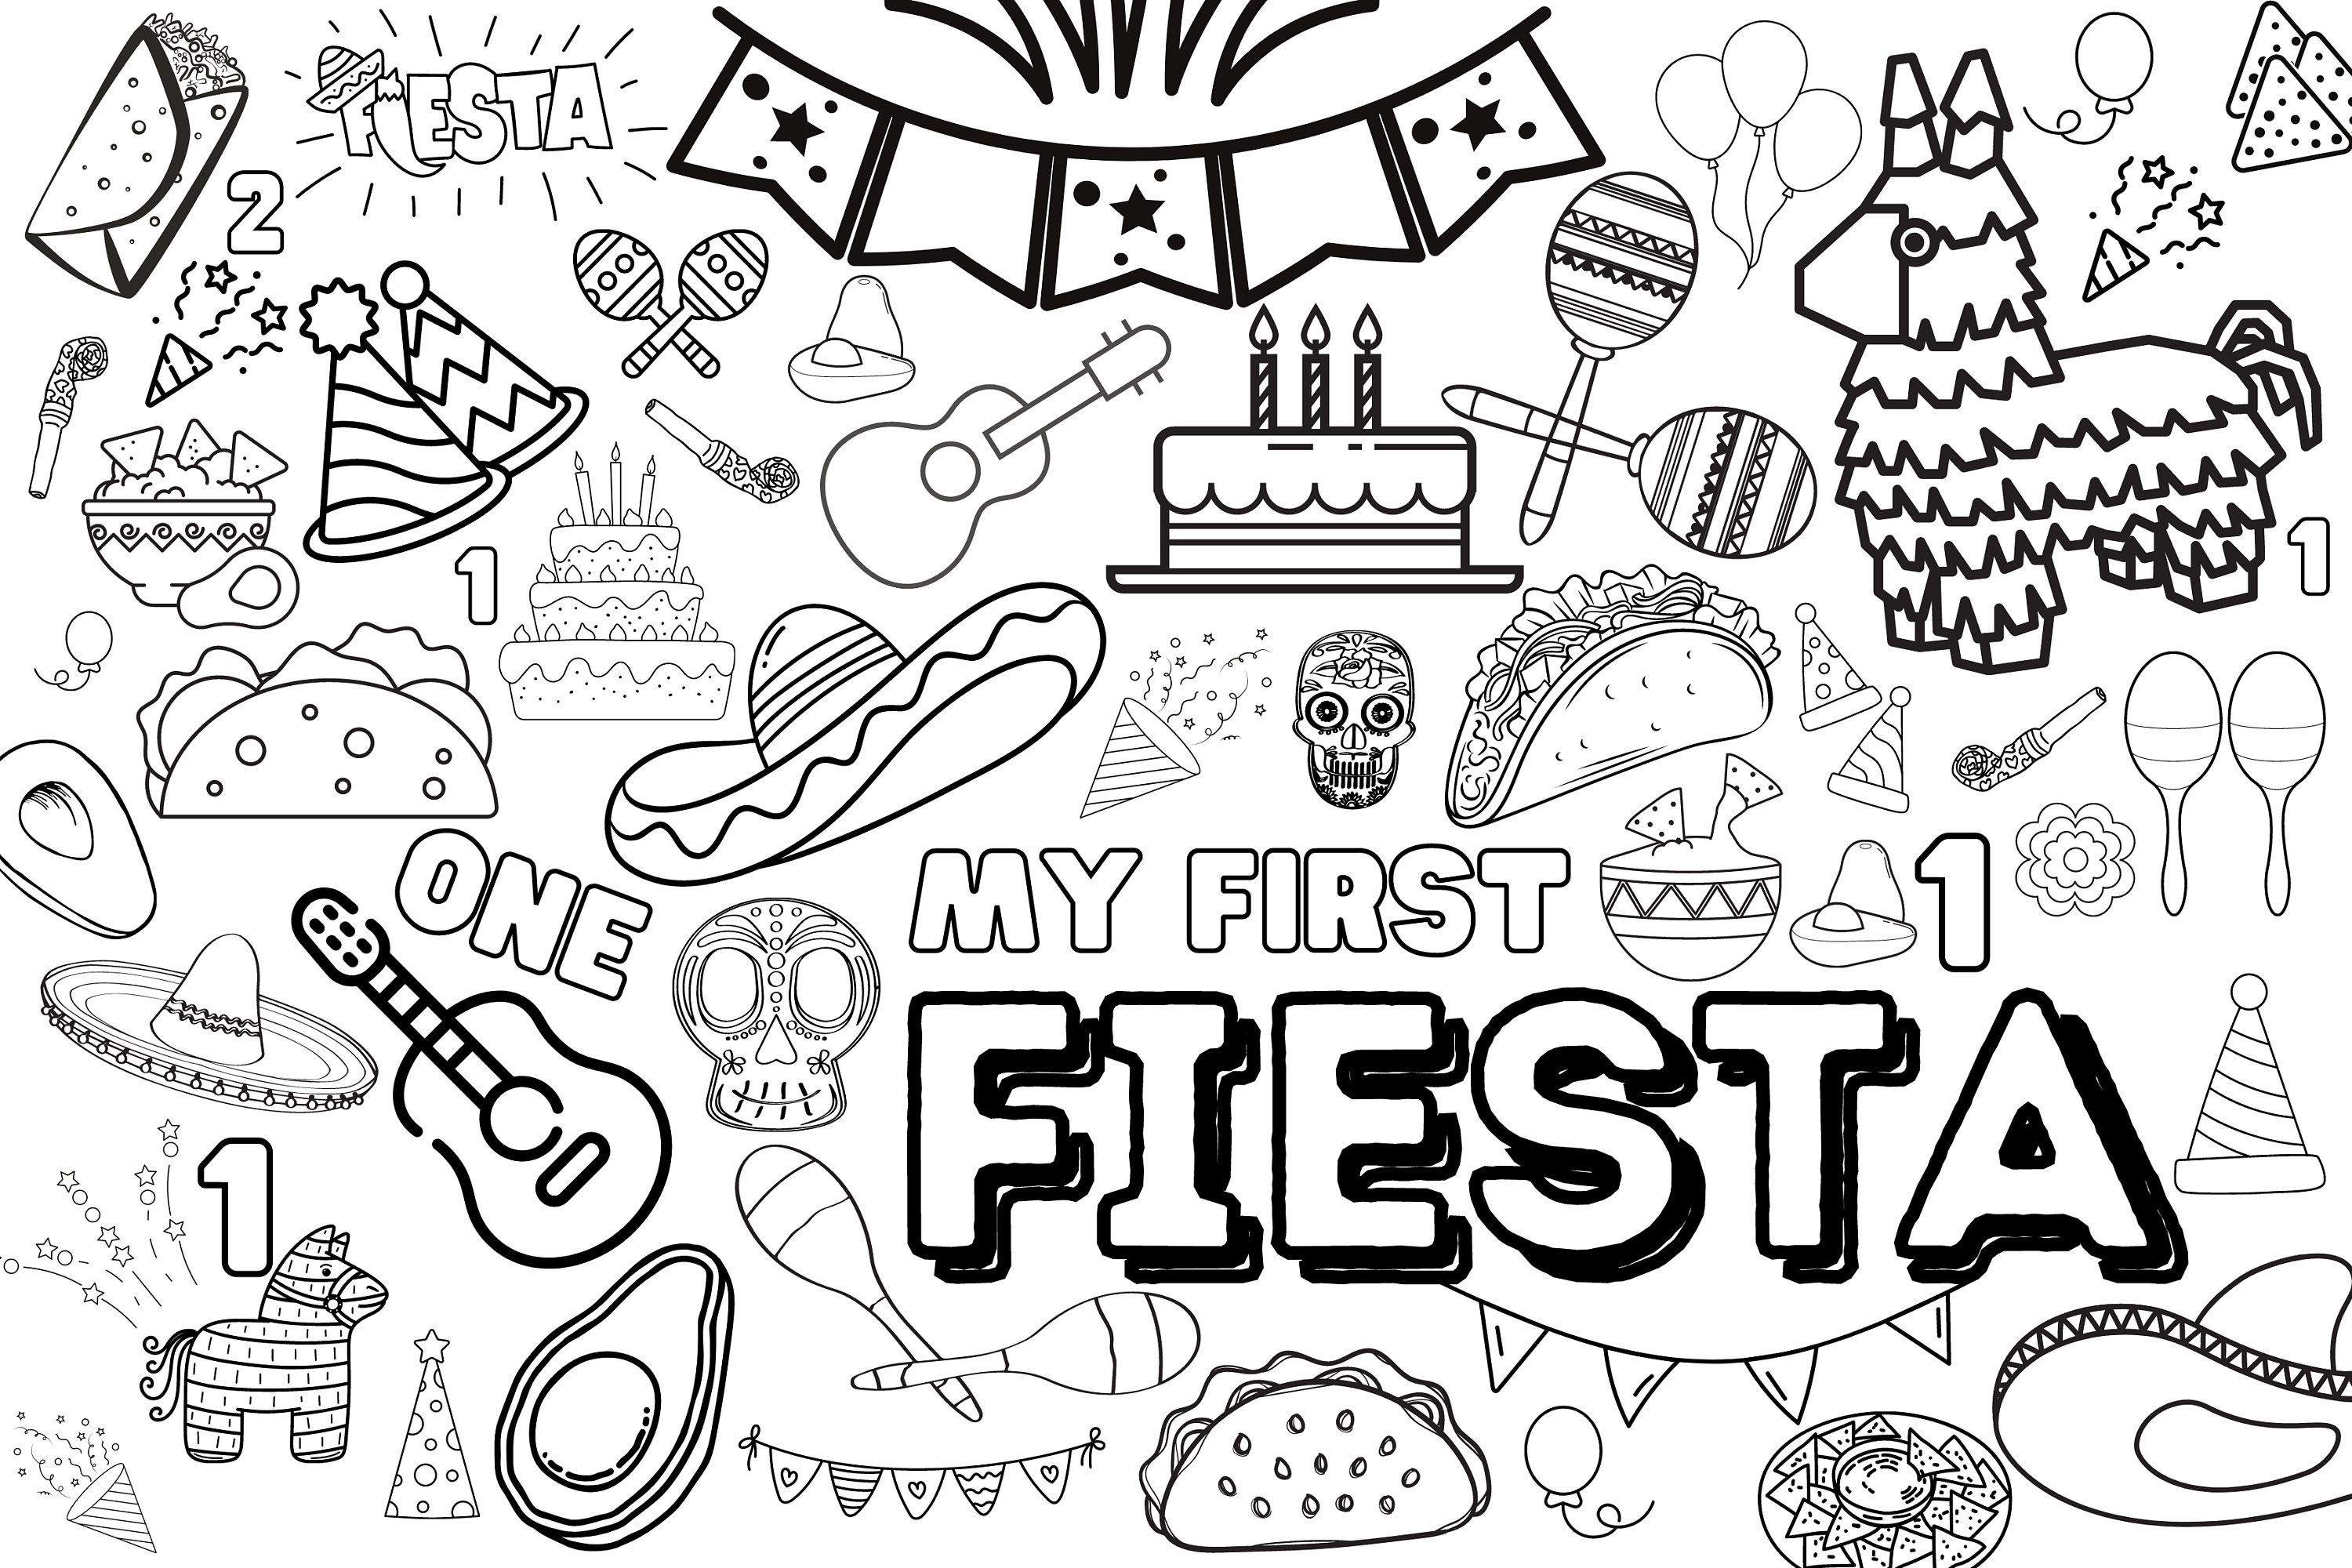 Huge first fiesta coloring poster for kids adults great for family time girls boys arts and crafts senior care facilities schools